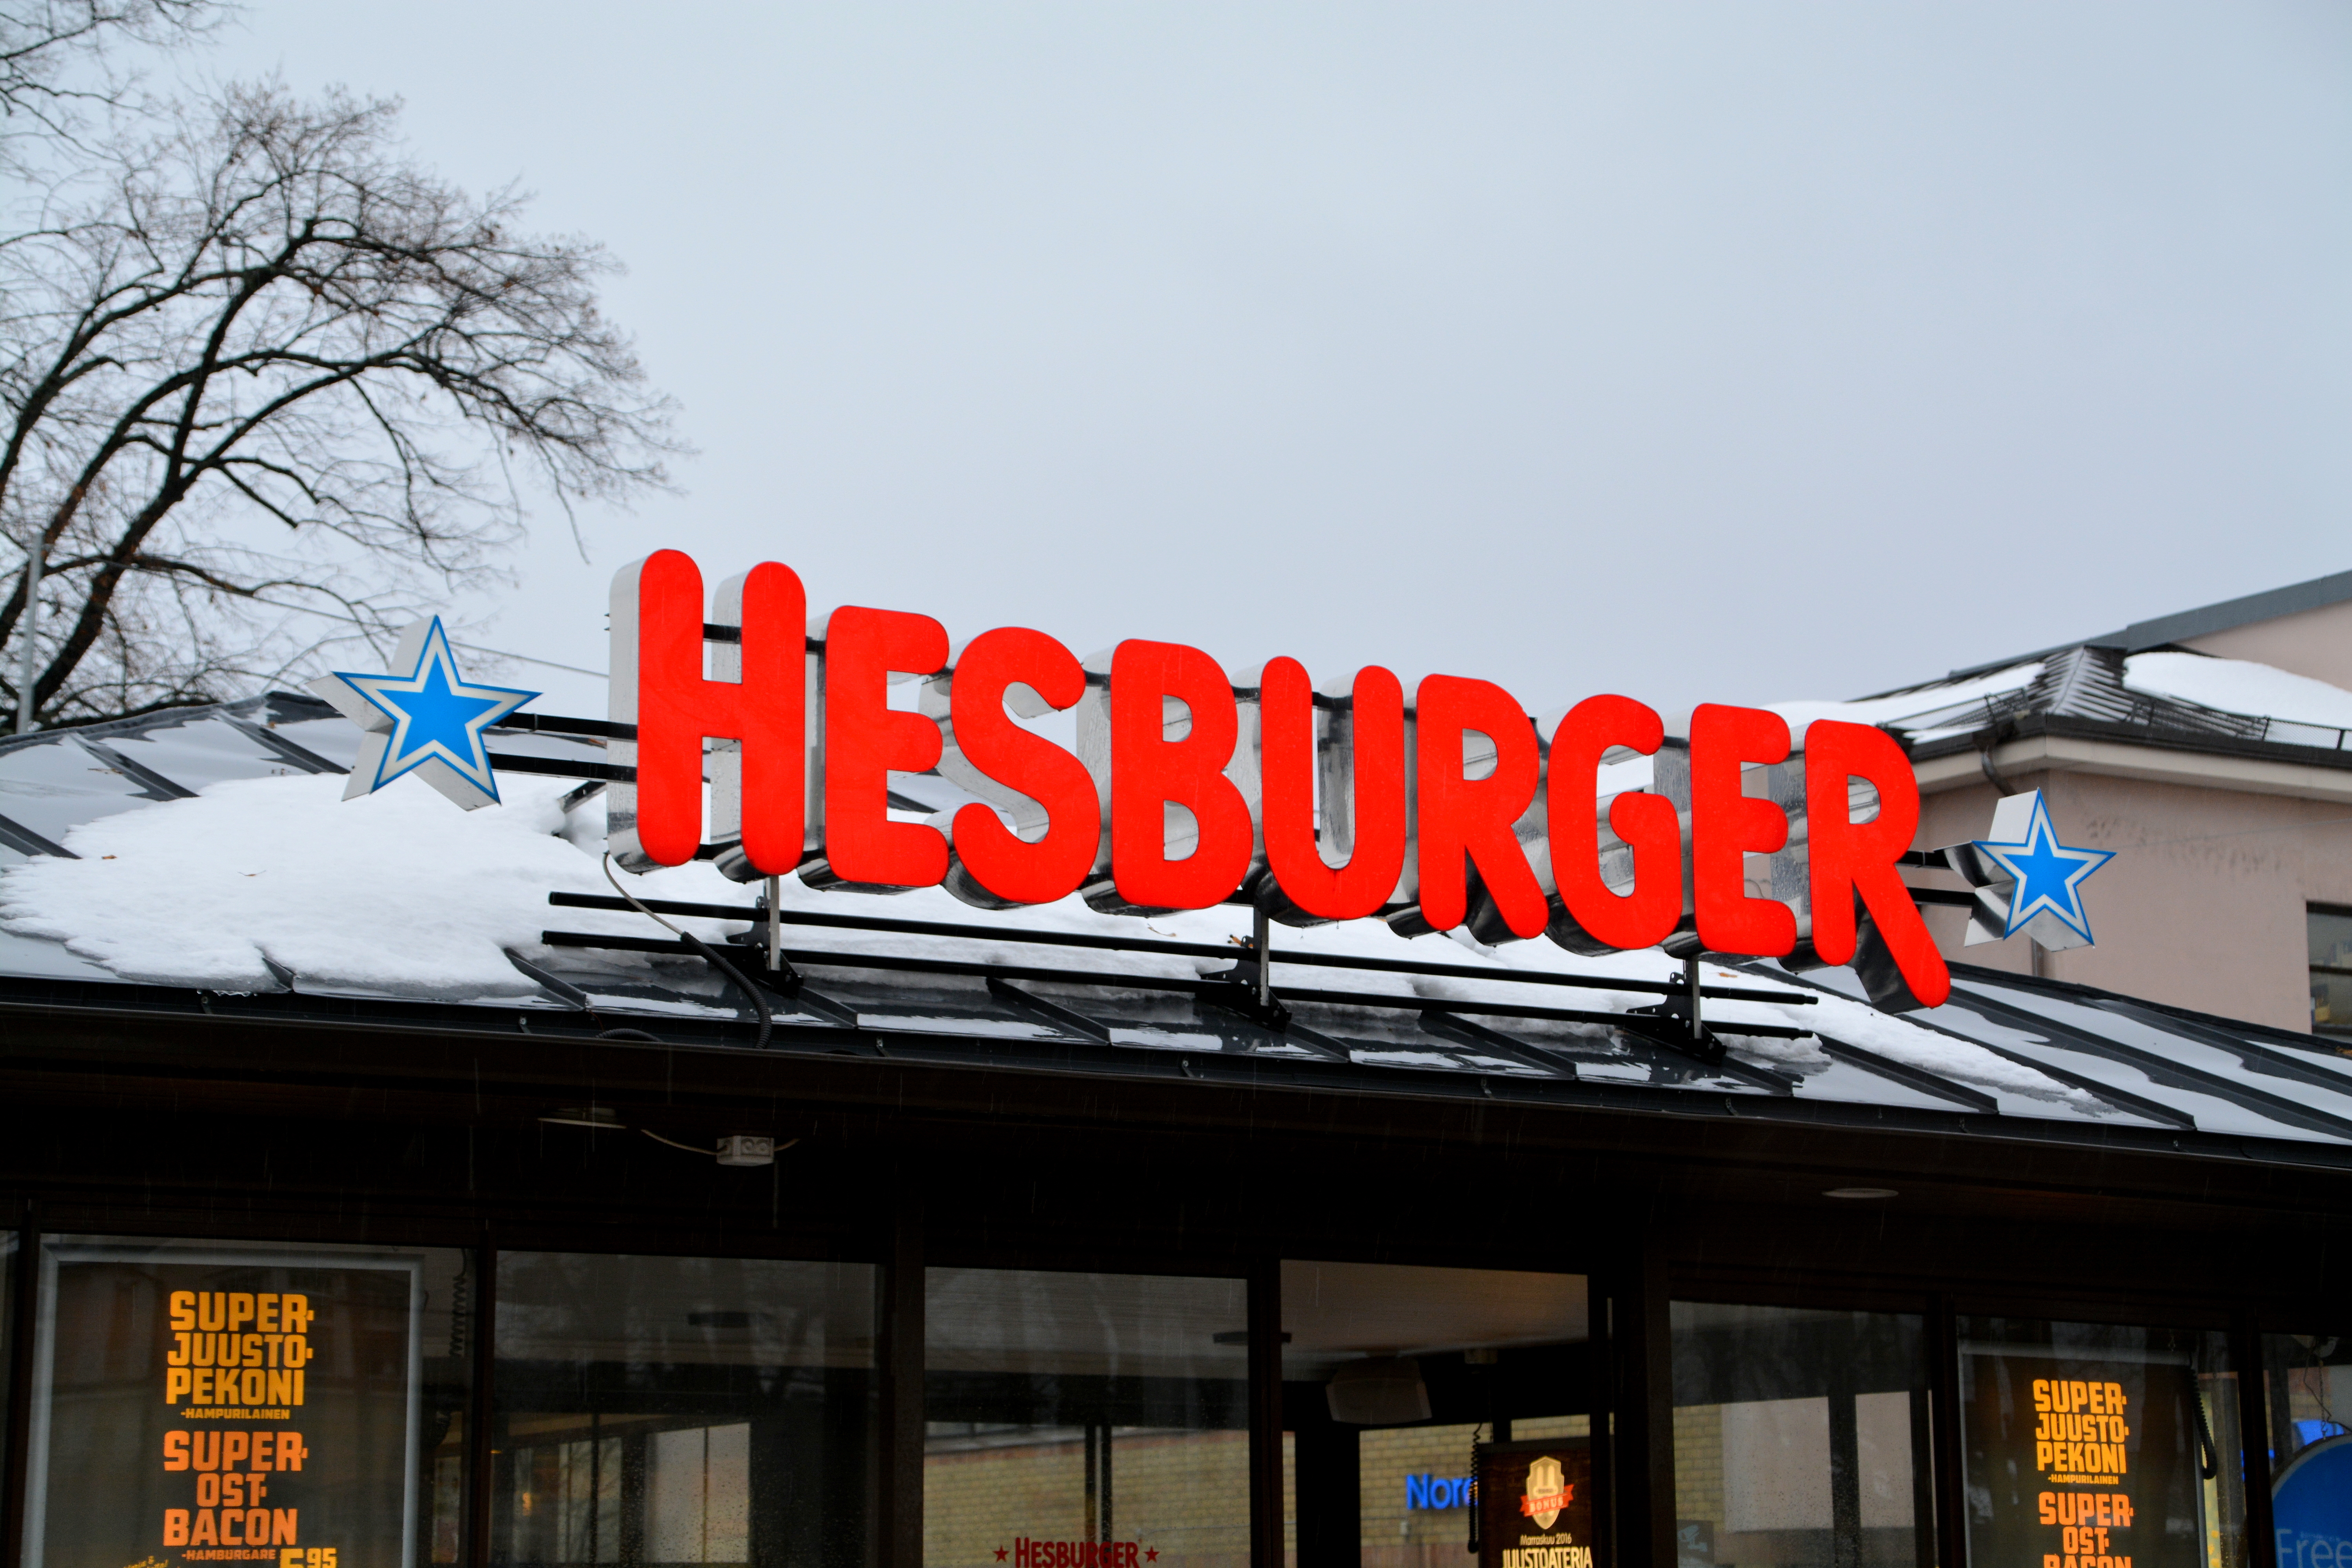 Hesburger promises to close all Russian offices during April